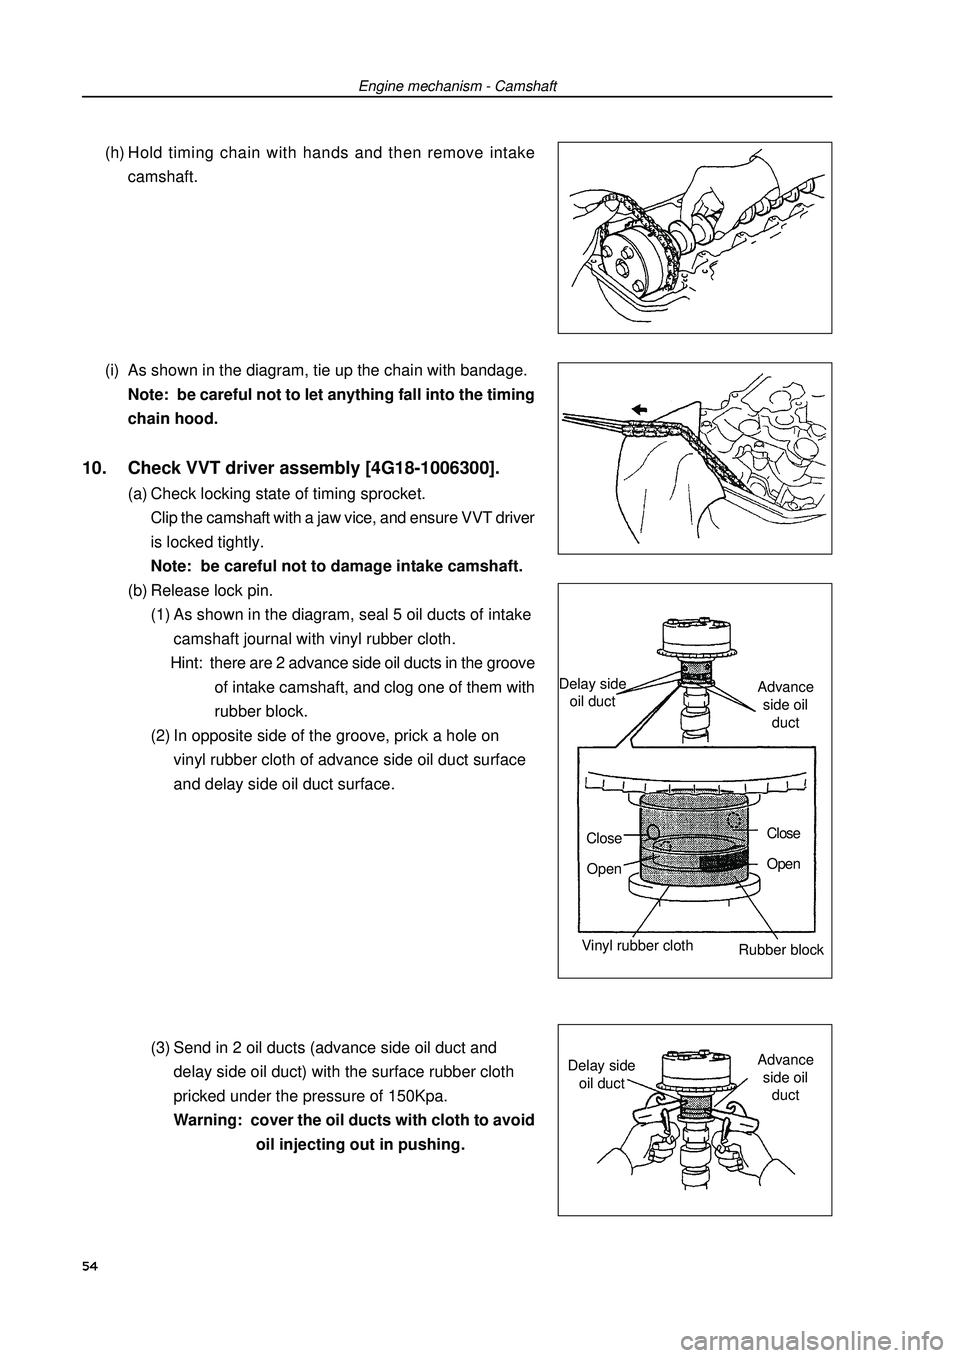 GEELY FC 2008  Workshop Manual Engine mechanism - Camshaft(h) Hold timing chain with hands and then remove intake
camshaft.
(i) As shown in the diagram, tie up the chain with bandage.
Note:  be careful not to let anything fall into